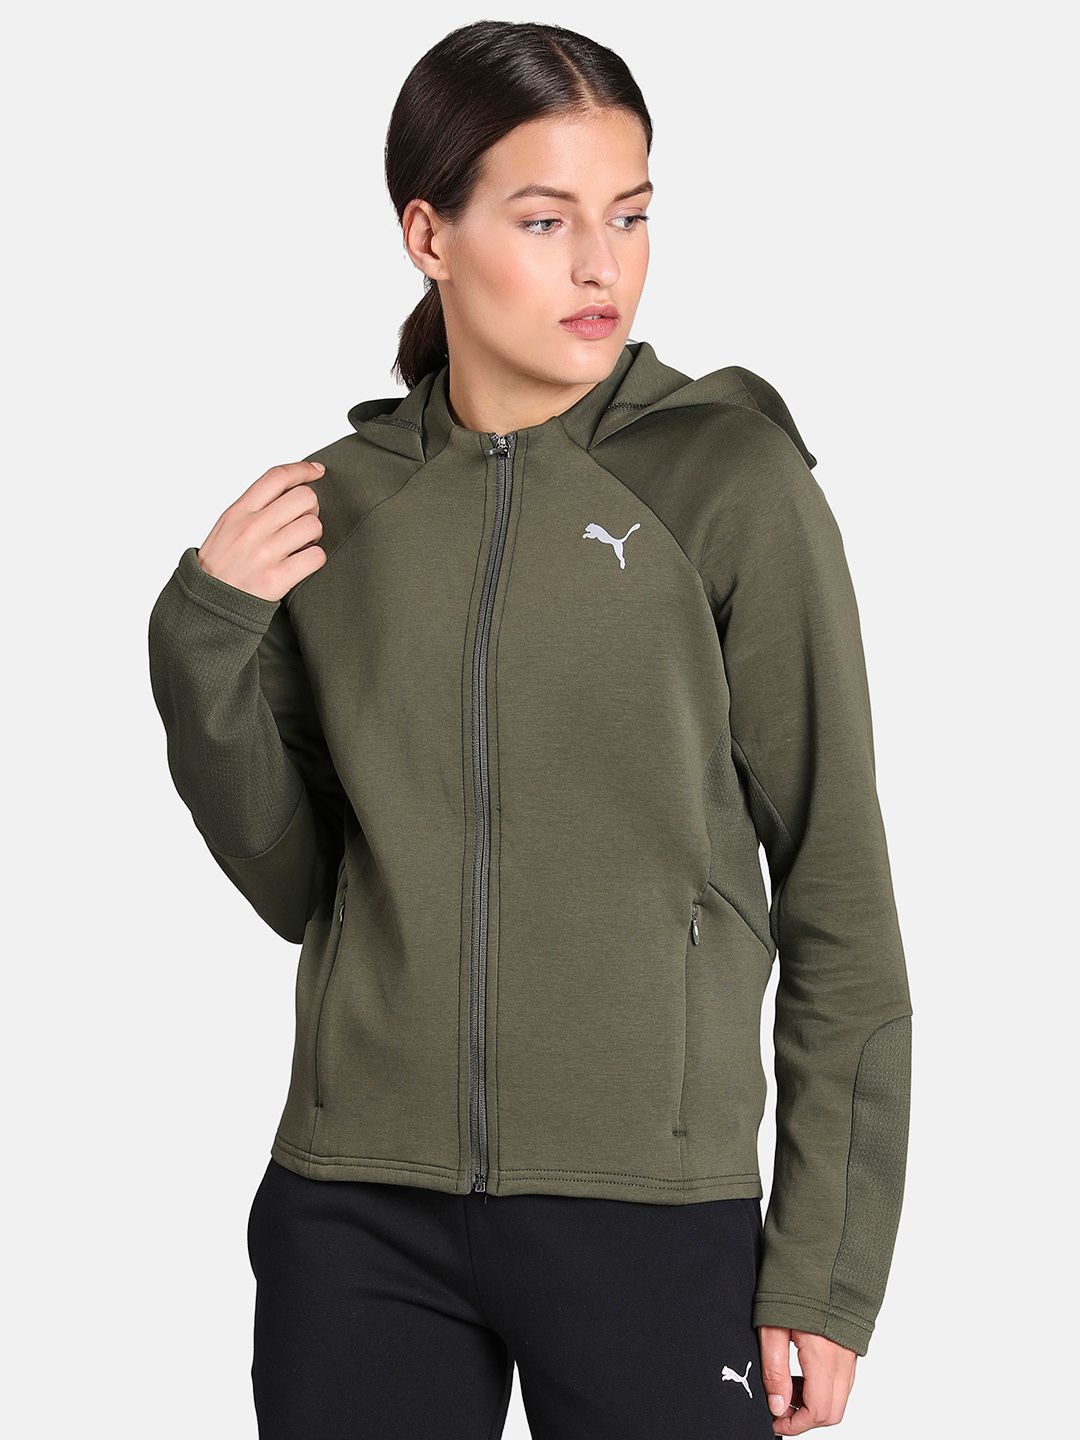 Puma Women Green Solid Sporty Jacket Price in India